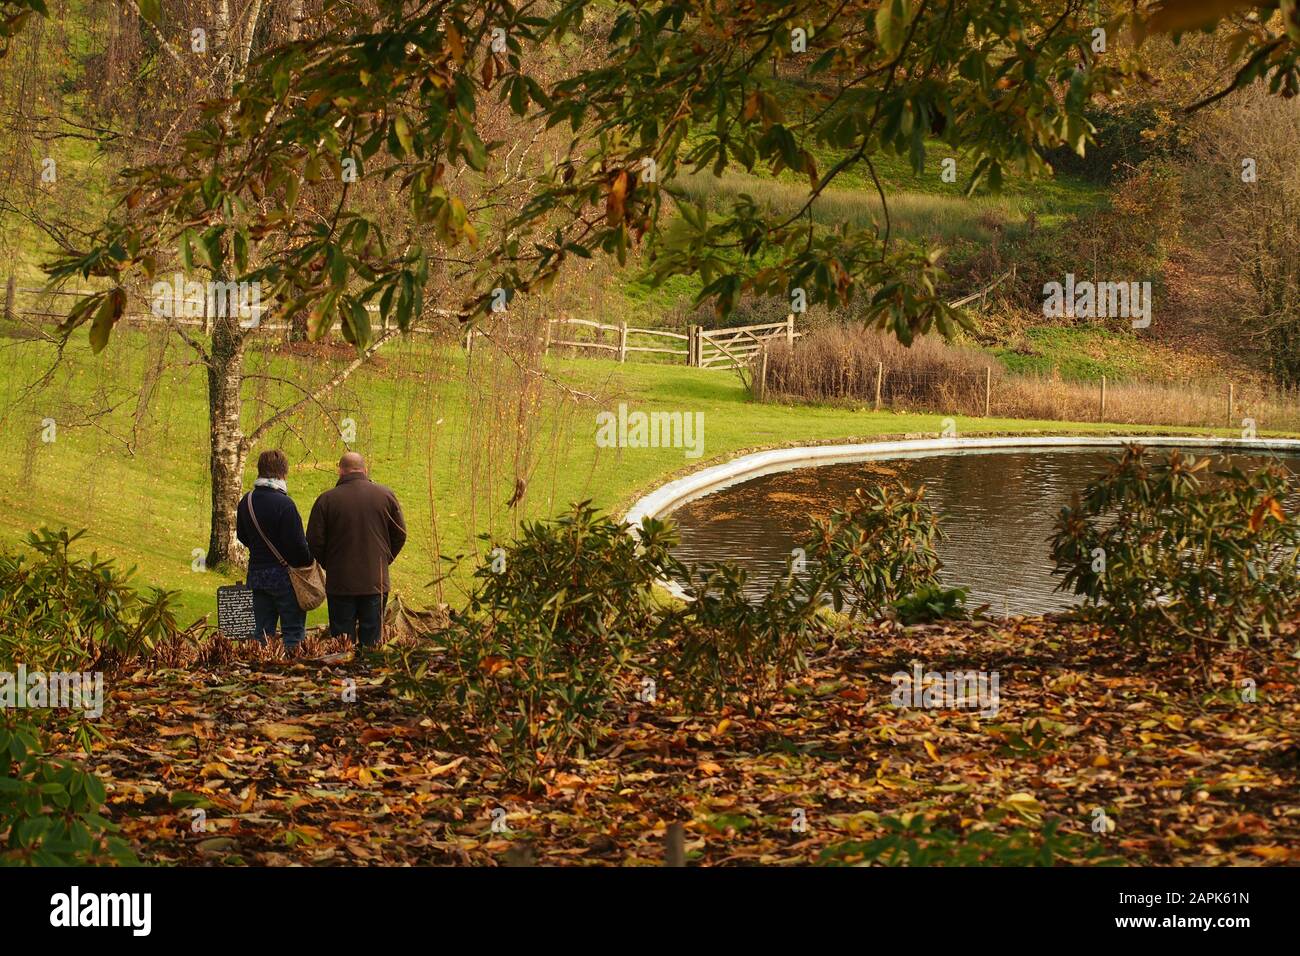 An older couple standing in a beautiful sloped autumn garden among the fallen leaves looking towards a pond and the view beyond Stock Photo